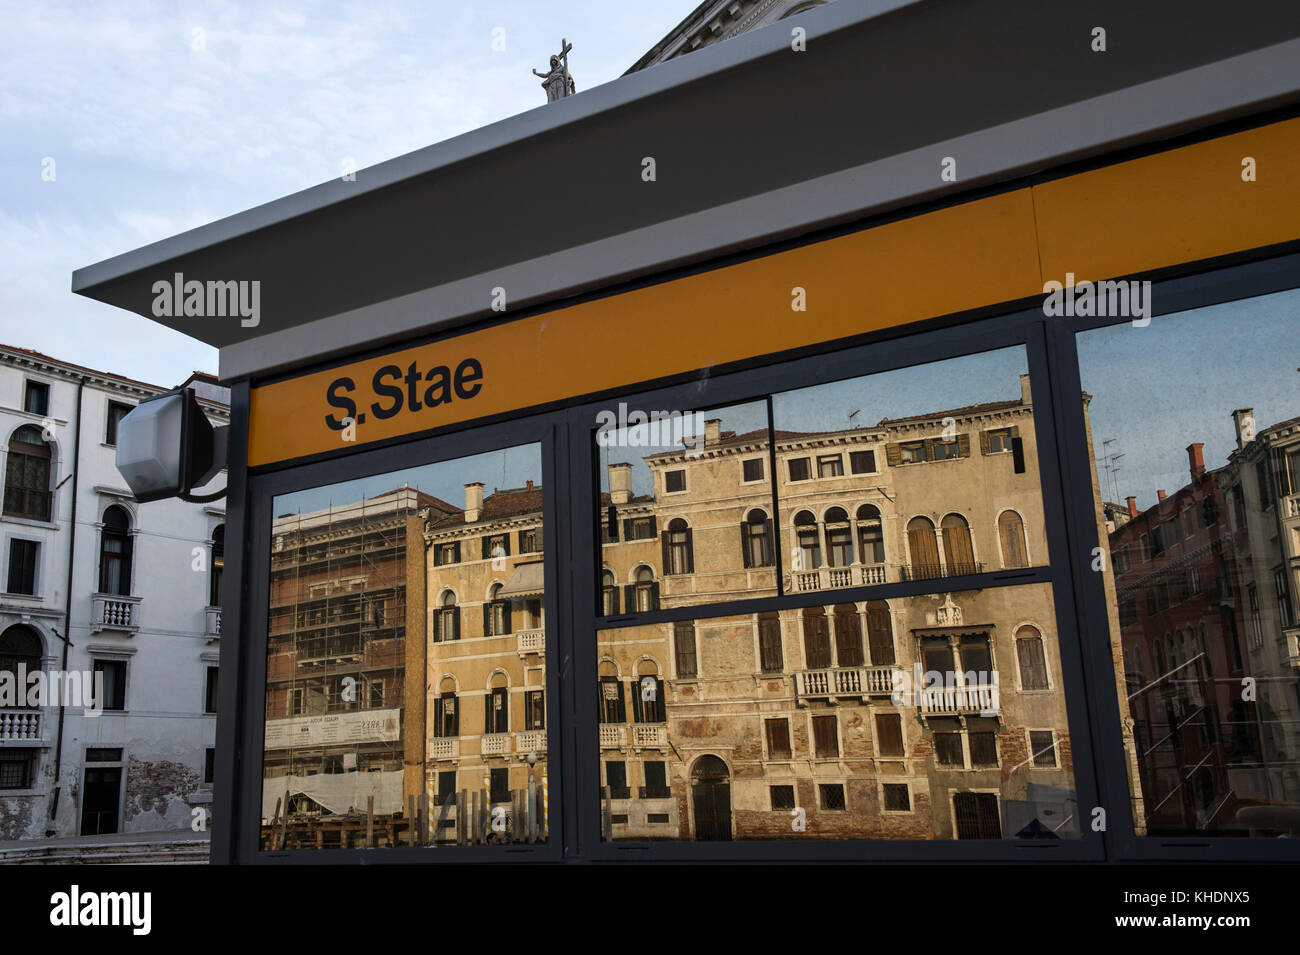 ITALY, VENETO, VENICE, BUILDING AMONG GRAND CANAL REFLECTED ON S.STAE BOAT STATION Stock Photo